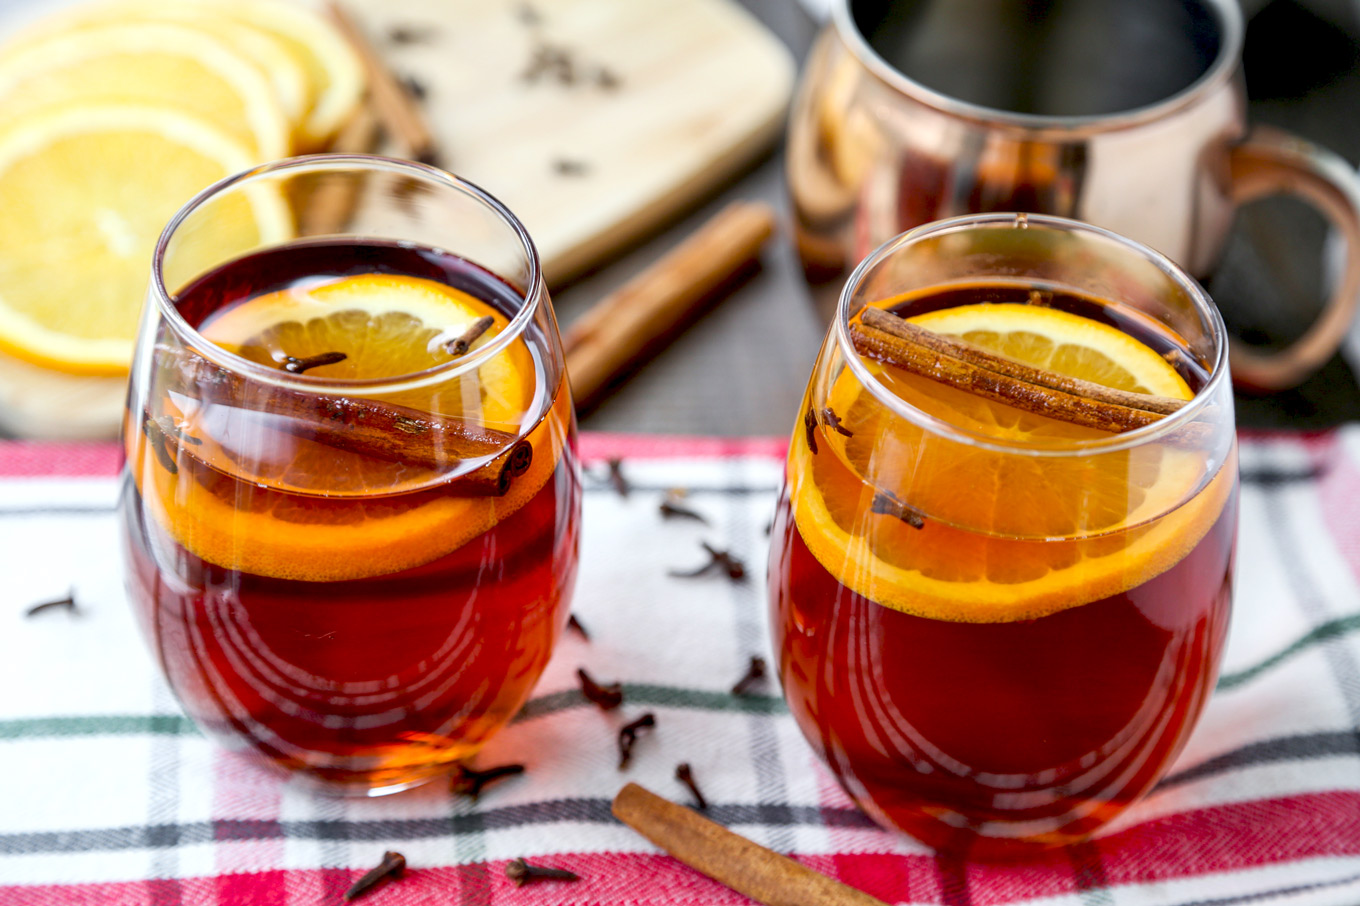 Non-Alcoholic Mulled Wine